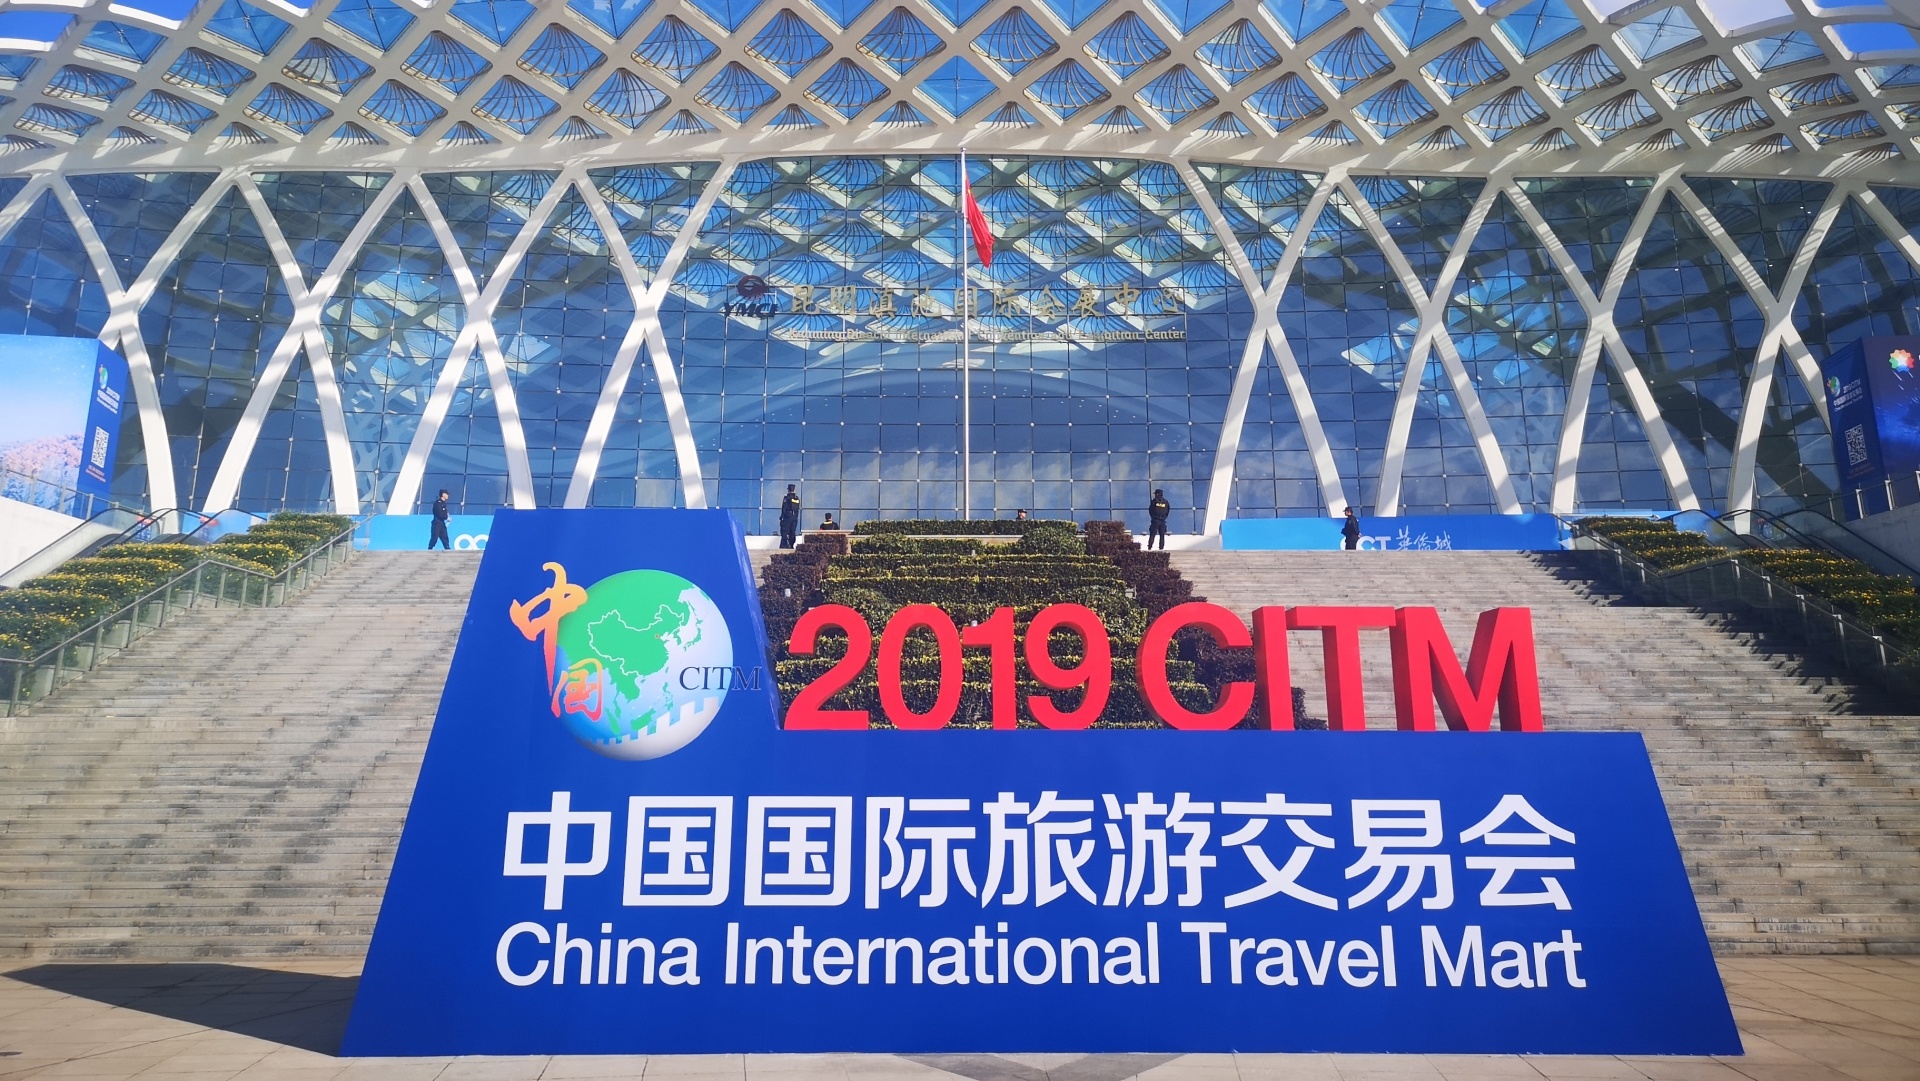 2019 China International Tourism Fair opened at Dianchi International Convention and Exhibition Center